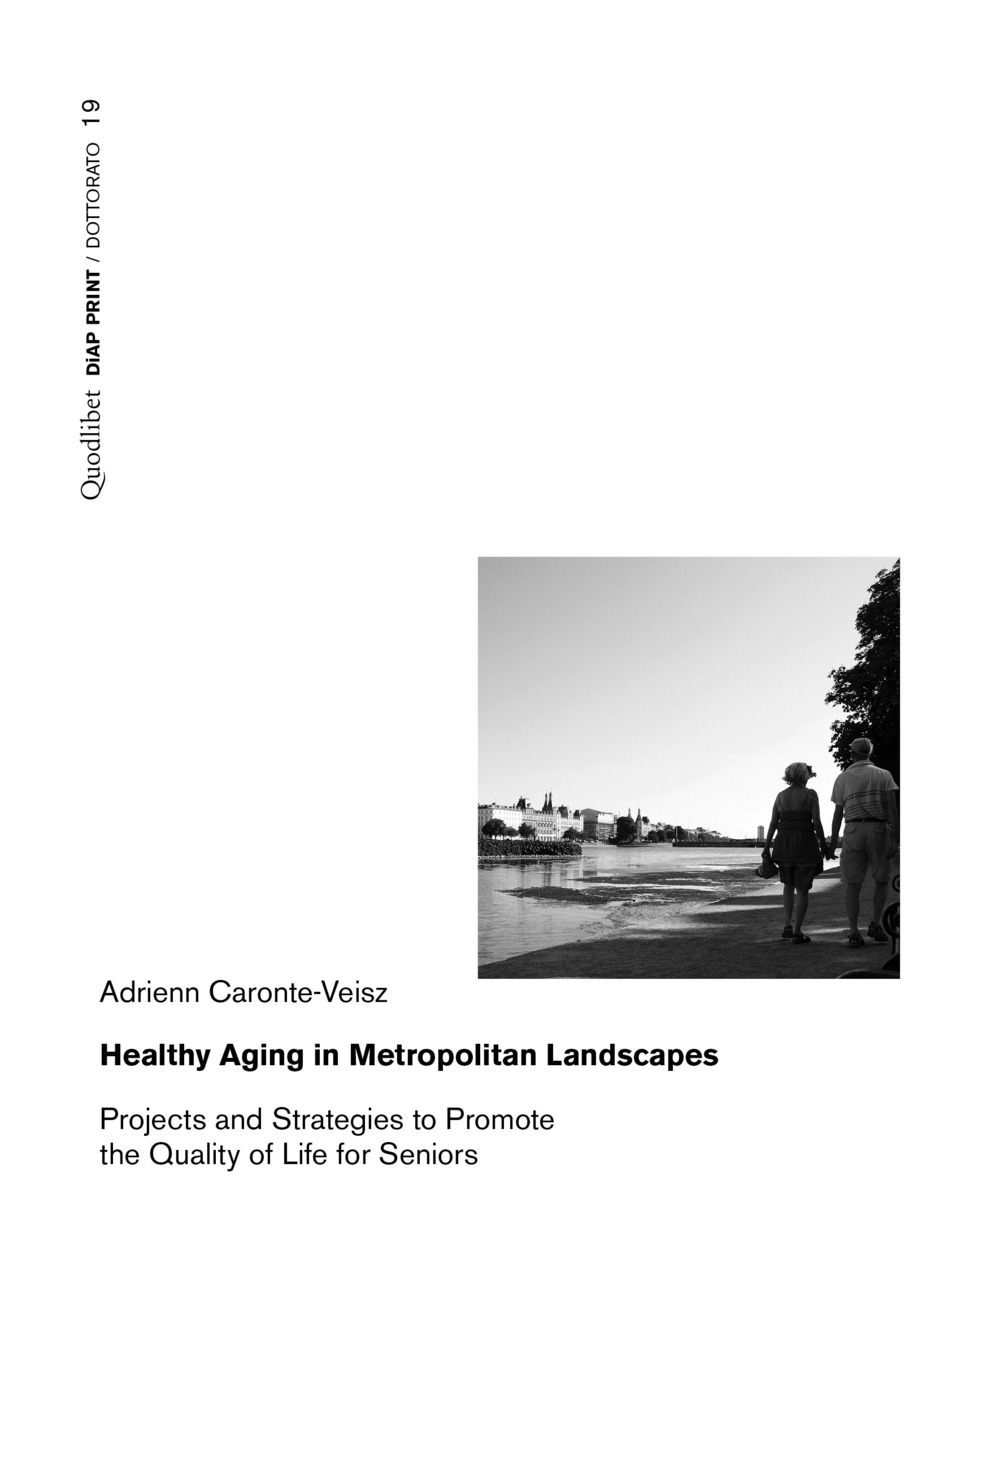 HEALTHY AGING IN METROPOLITAN LANDSCAPES. PROJECTS AND STRATEGIES TO PROMOTE THE QUALITY OF LIFE FOR SENIORS - Caronte-Veisz Adrienn - 9788822906038